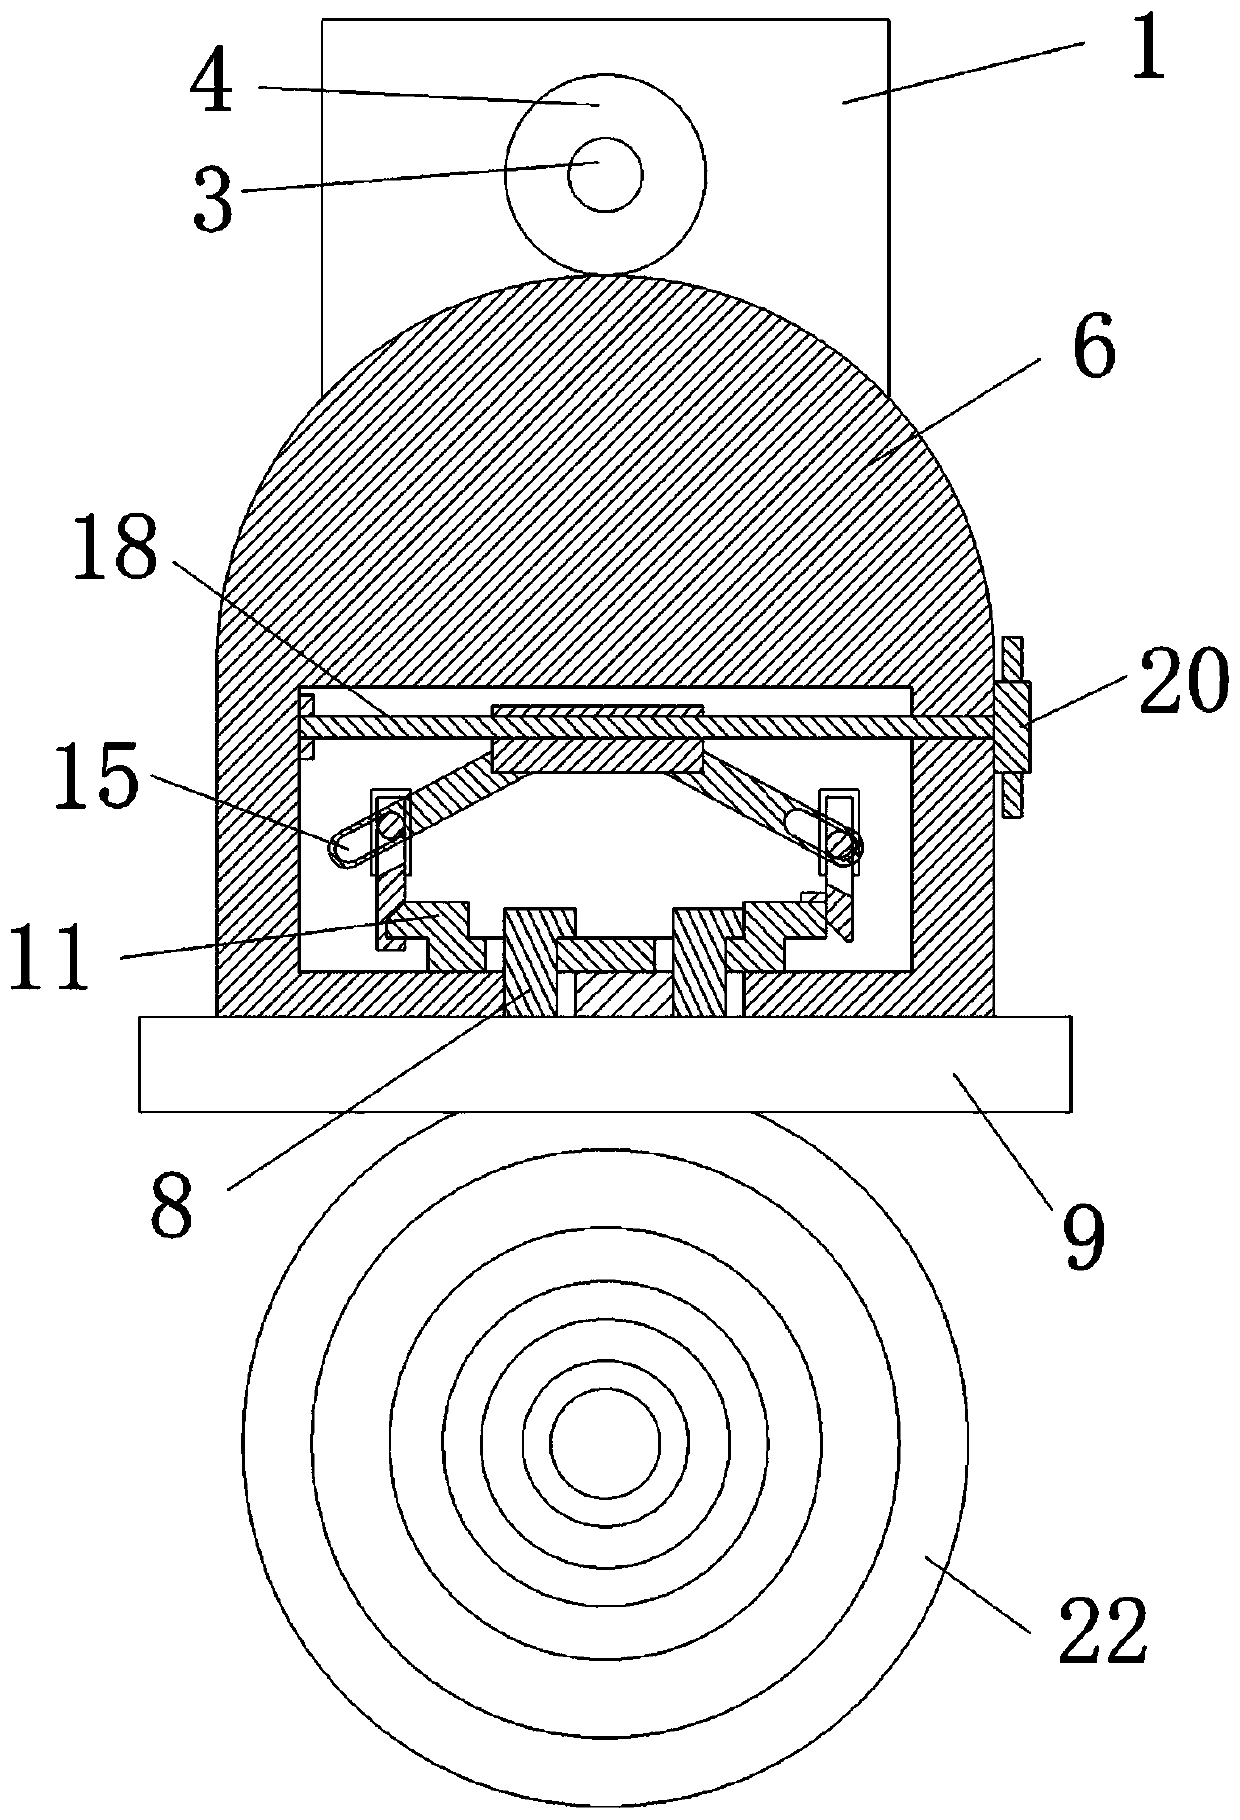 Rotary positioning mechanism for convenient replacement of target rings and its application method